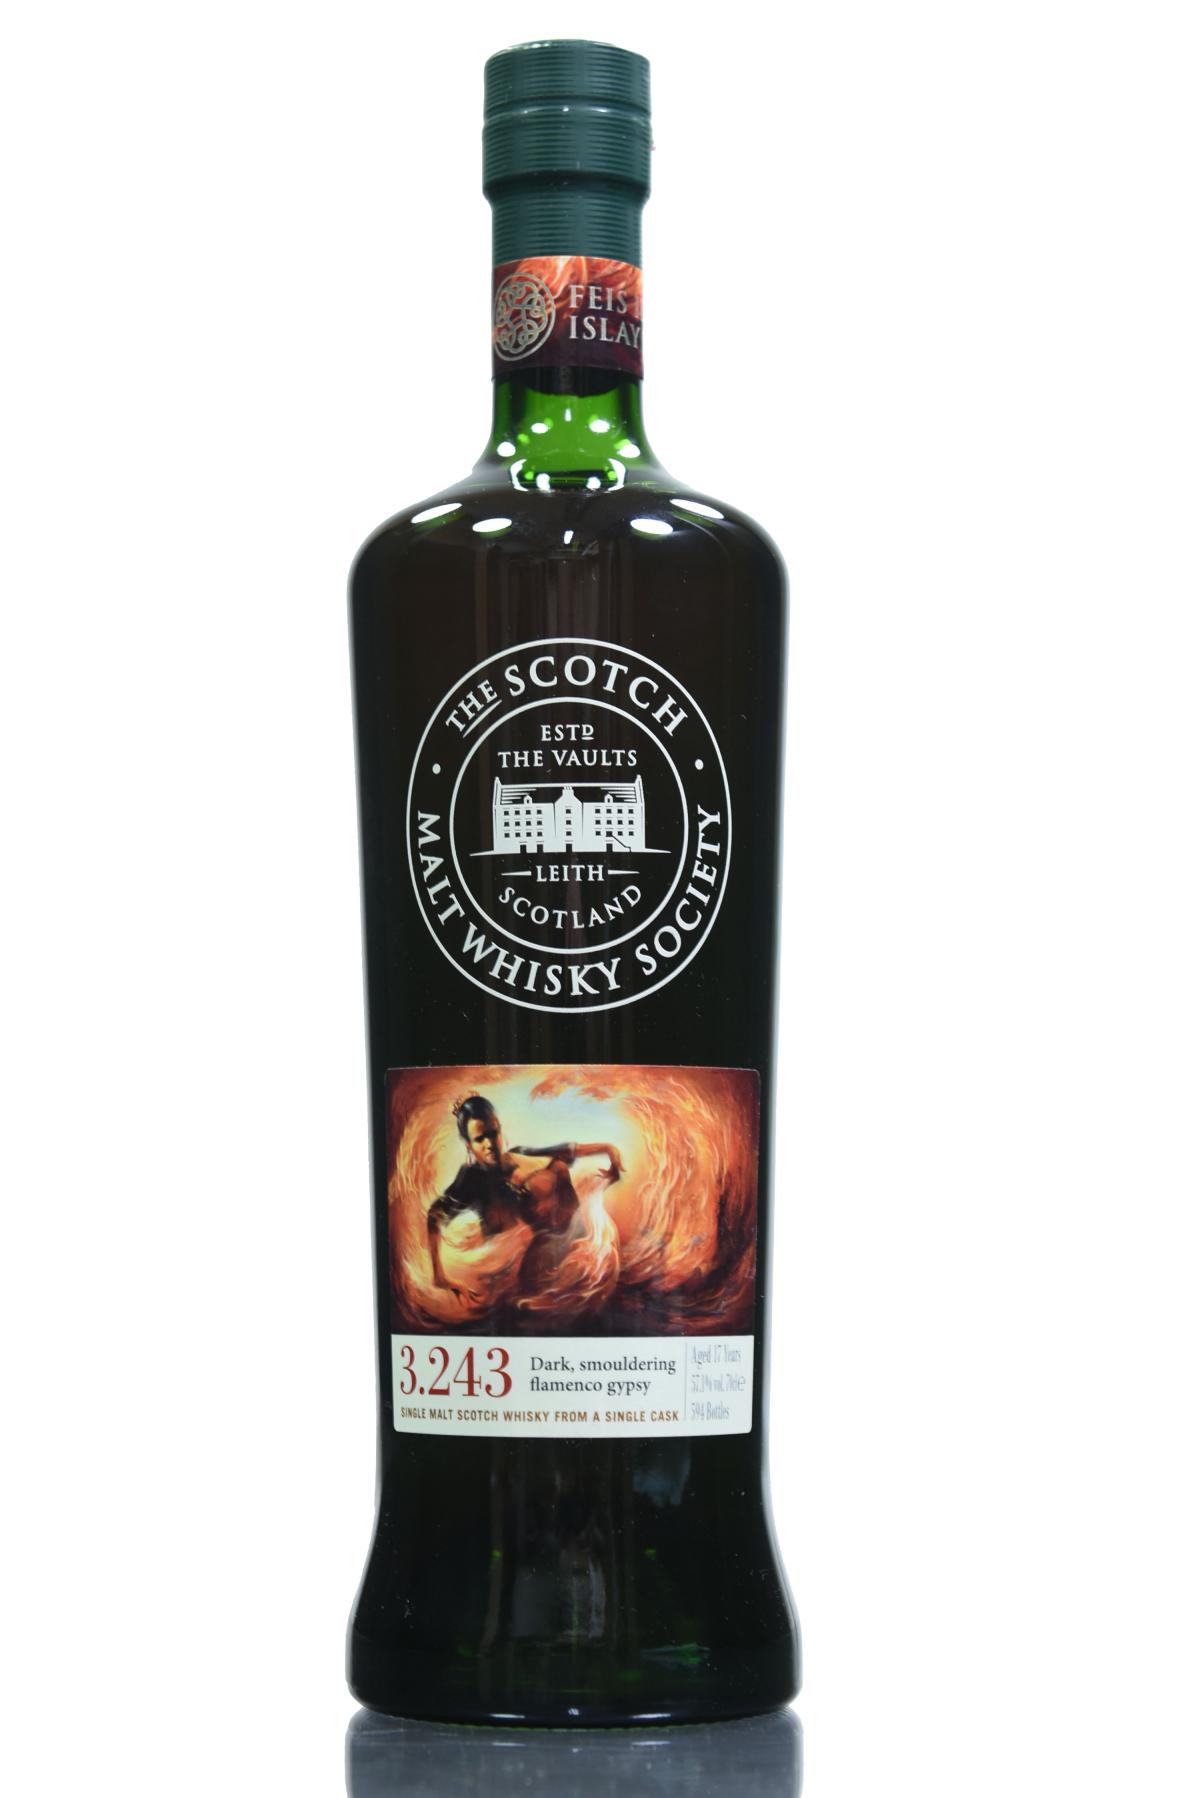 Bowmore 17 Year Old - SMWS 3.243